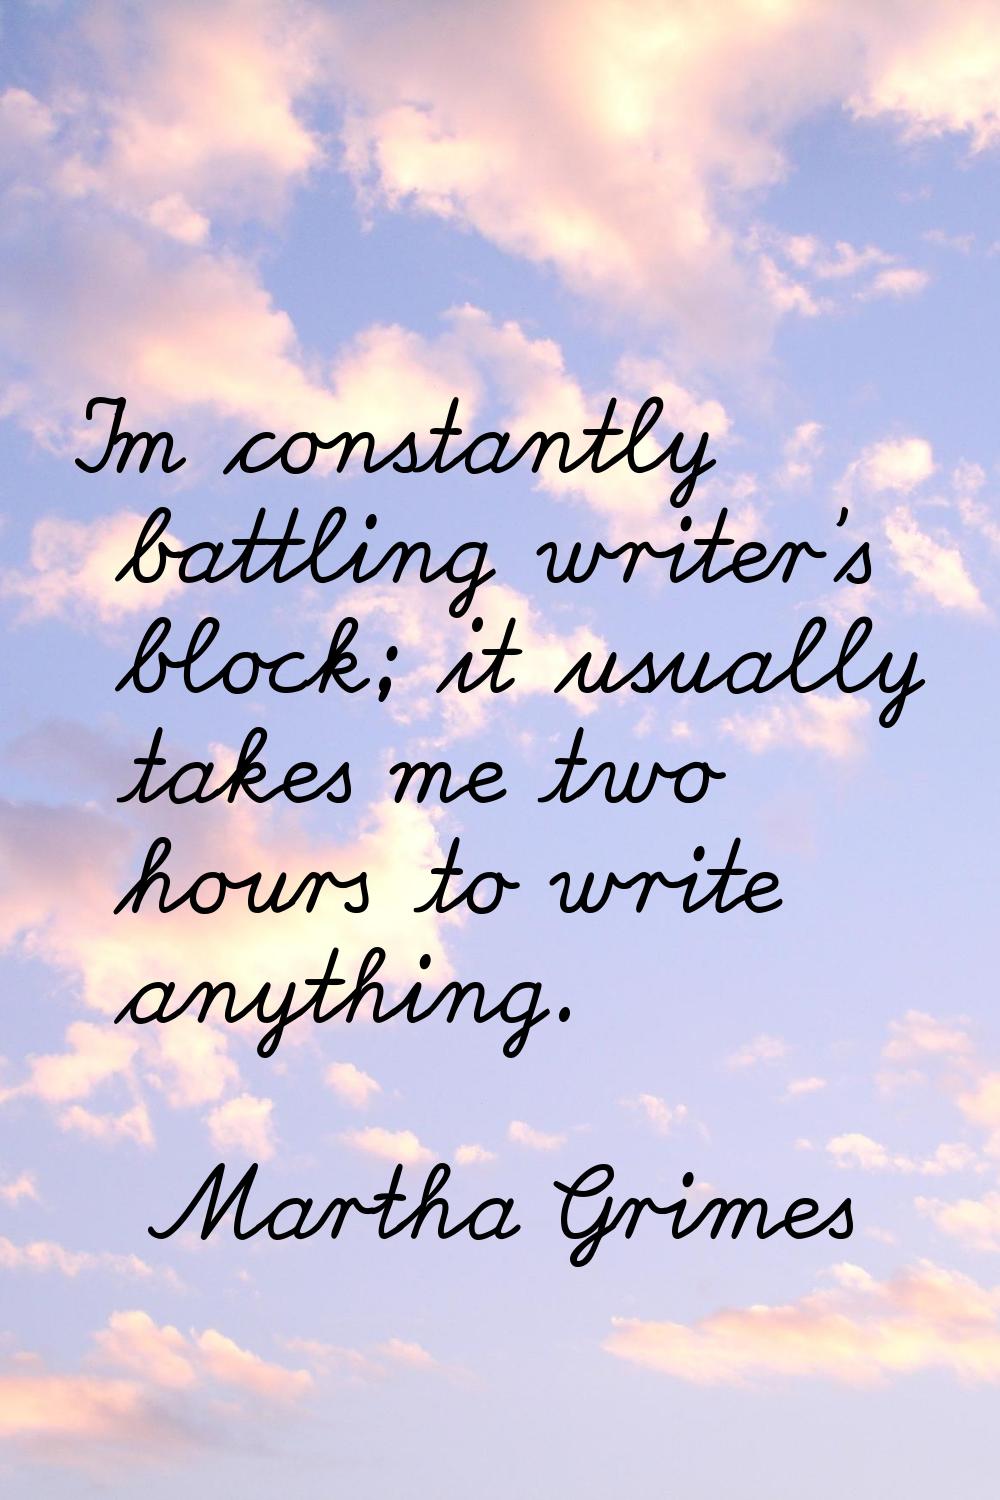 I'm constantly battling writer's block; it usually takes me two hours to write anything.